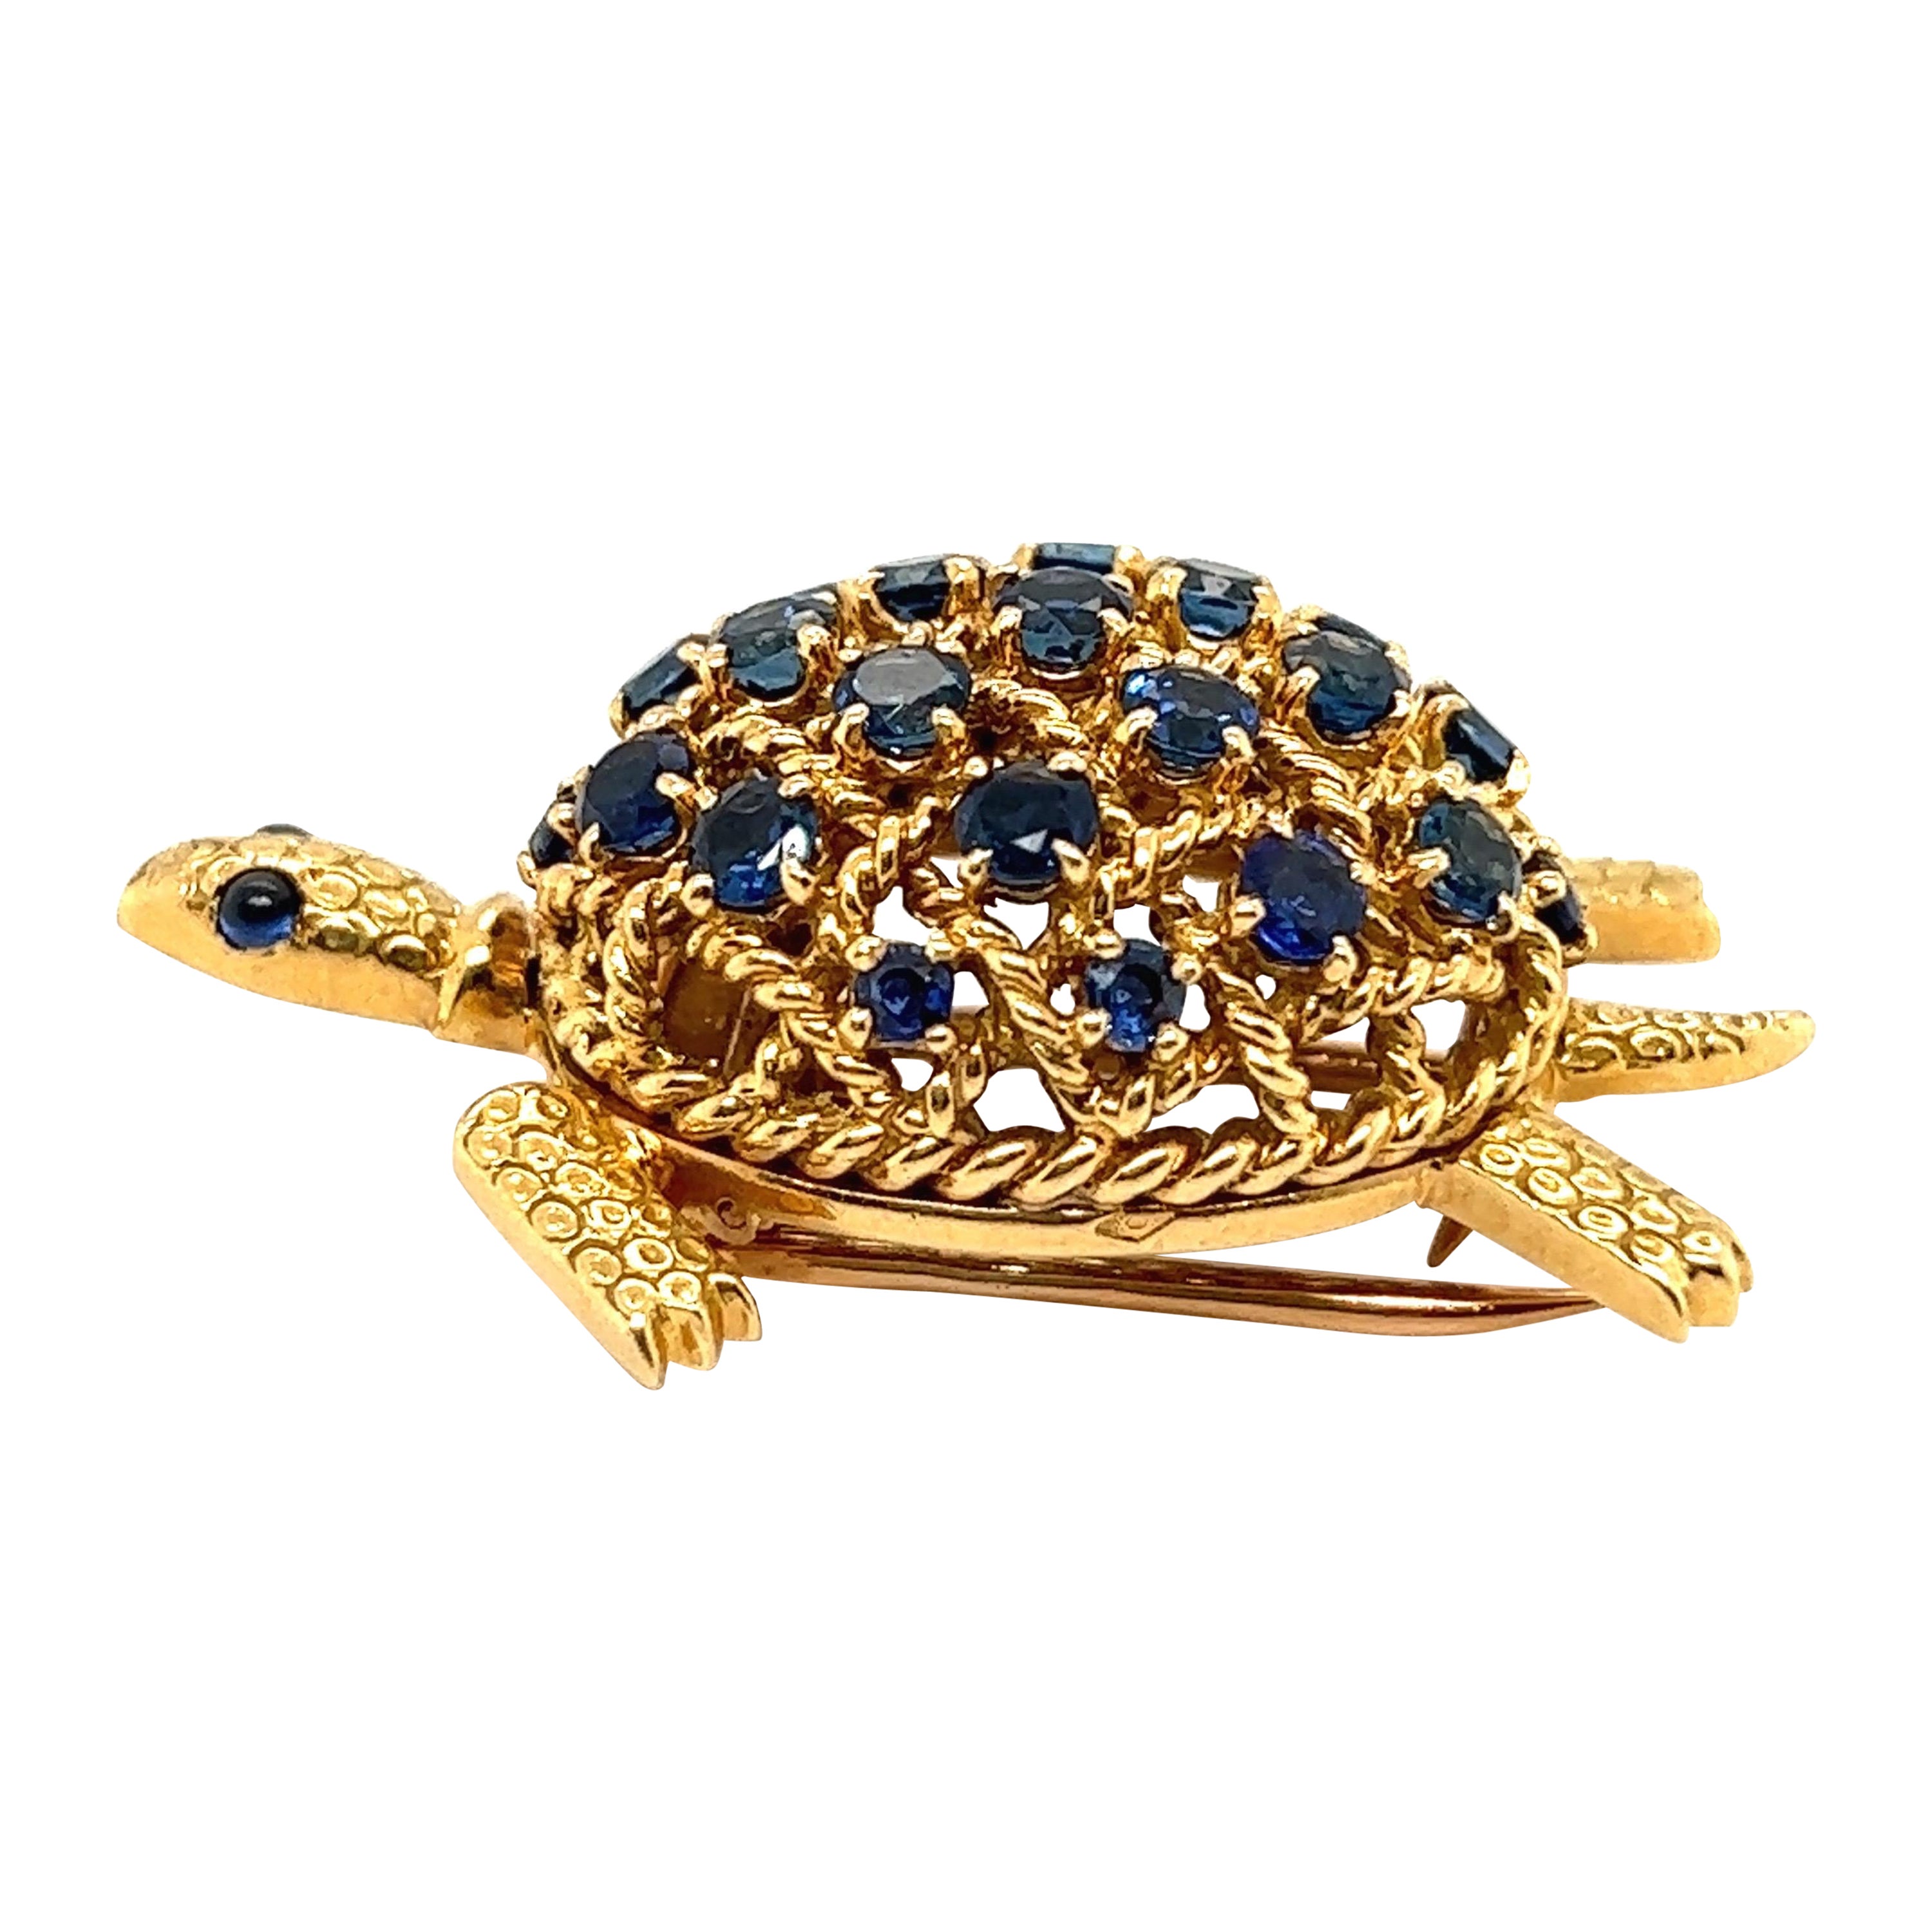 18 Karat Yellow Gold and Sapphire Turtle Brooch, by Cartier, circa 1950-1960s For Sale